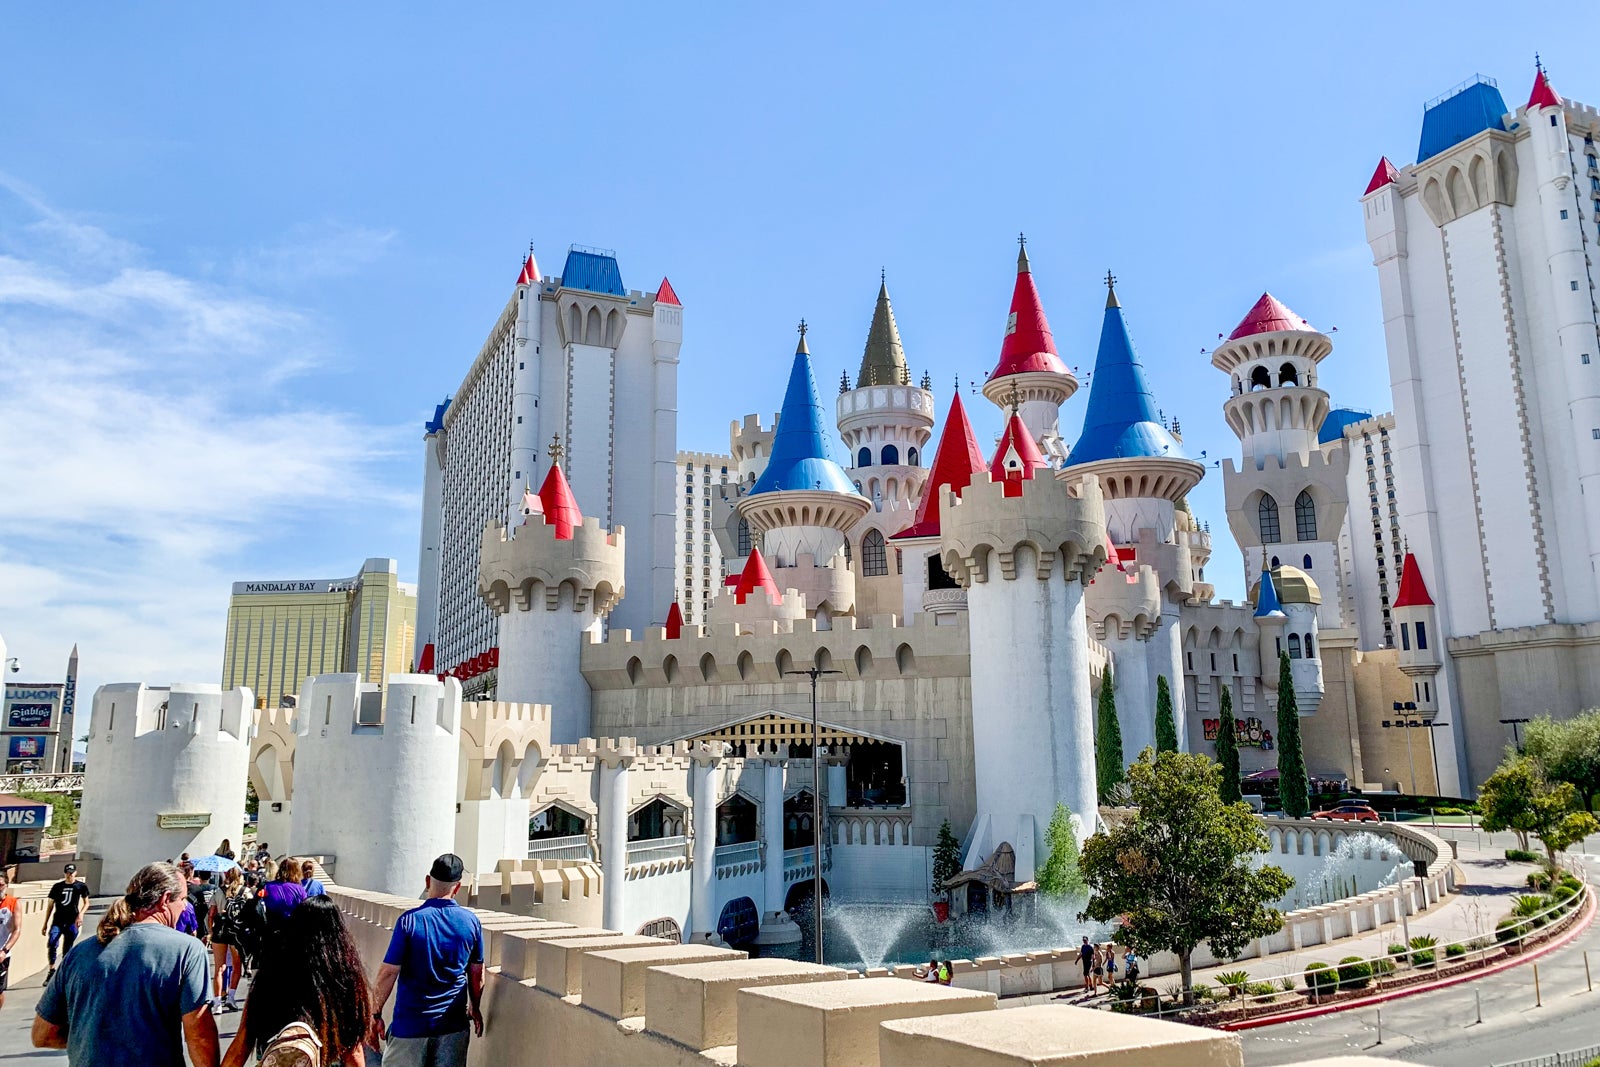 Hardly fit for a knight: Review of Excalibur Hotel and Casino in